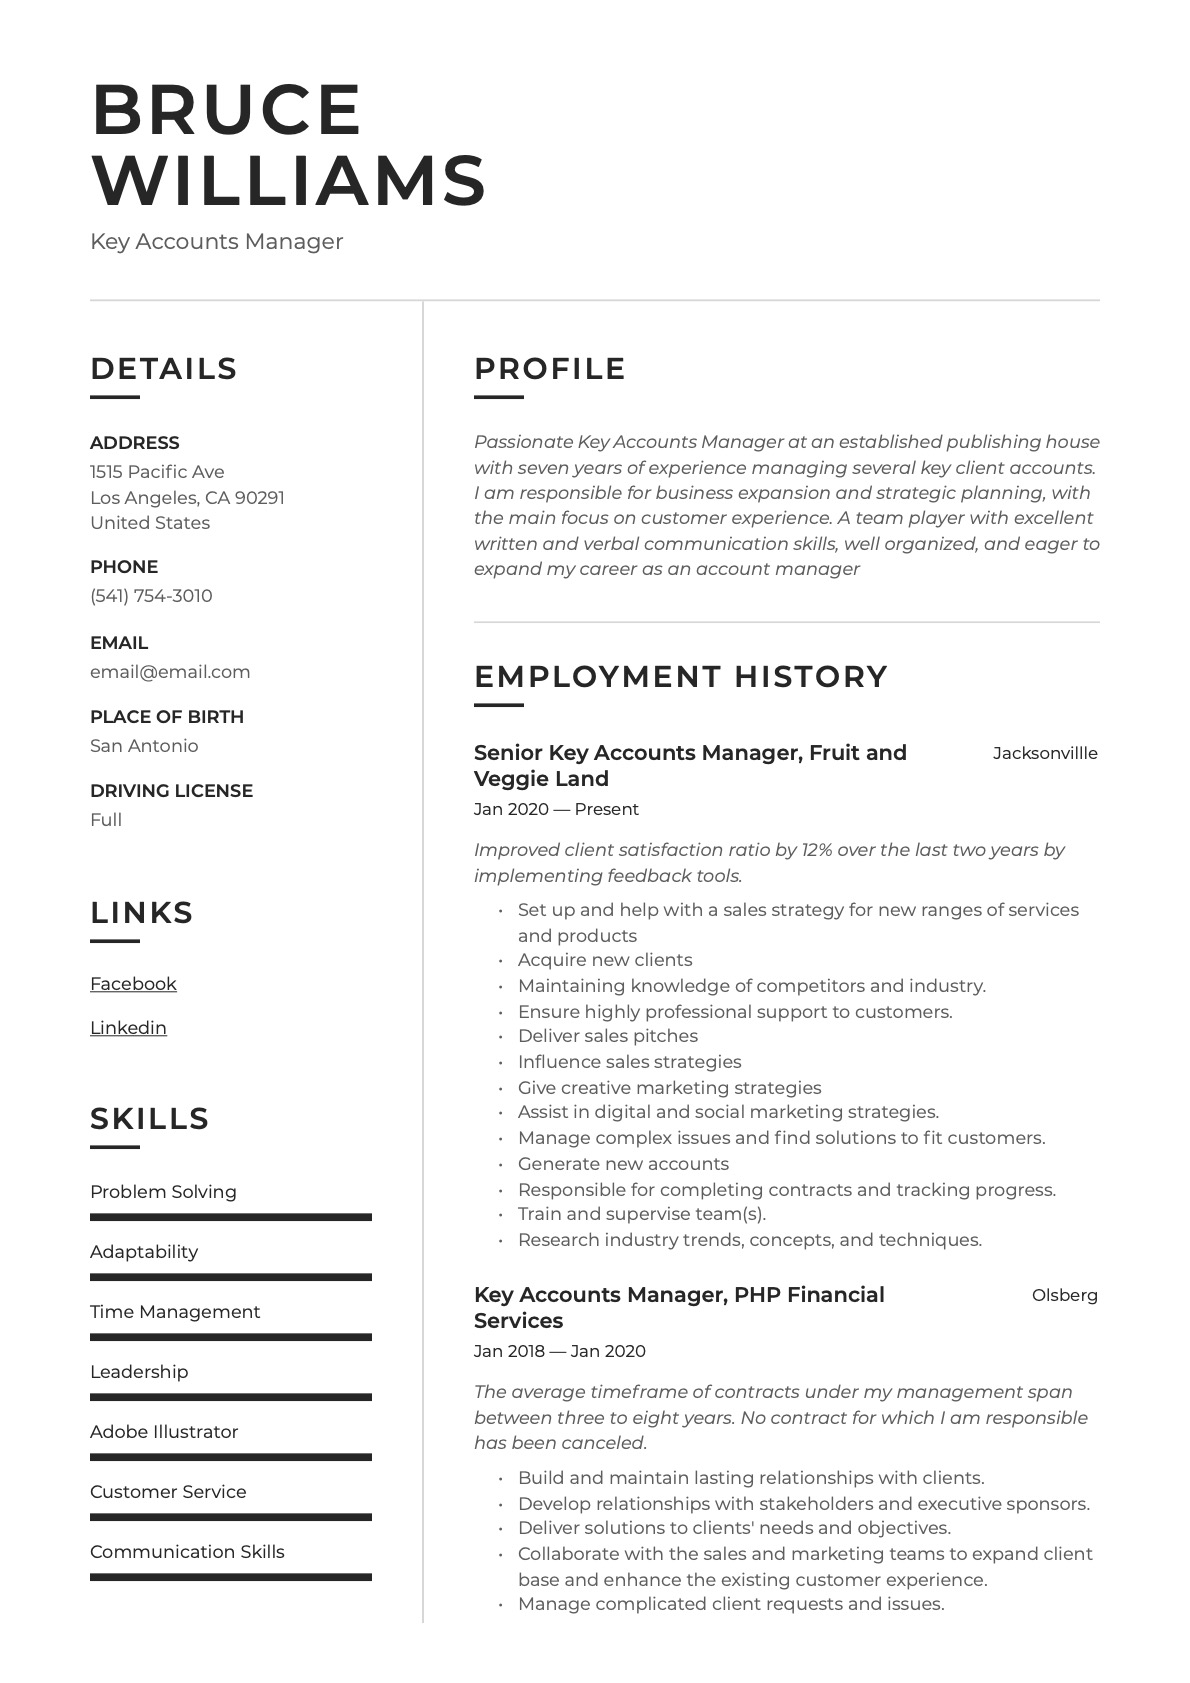 Example resume key accounts manager-14